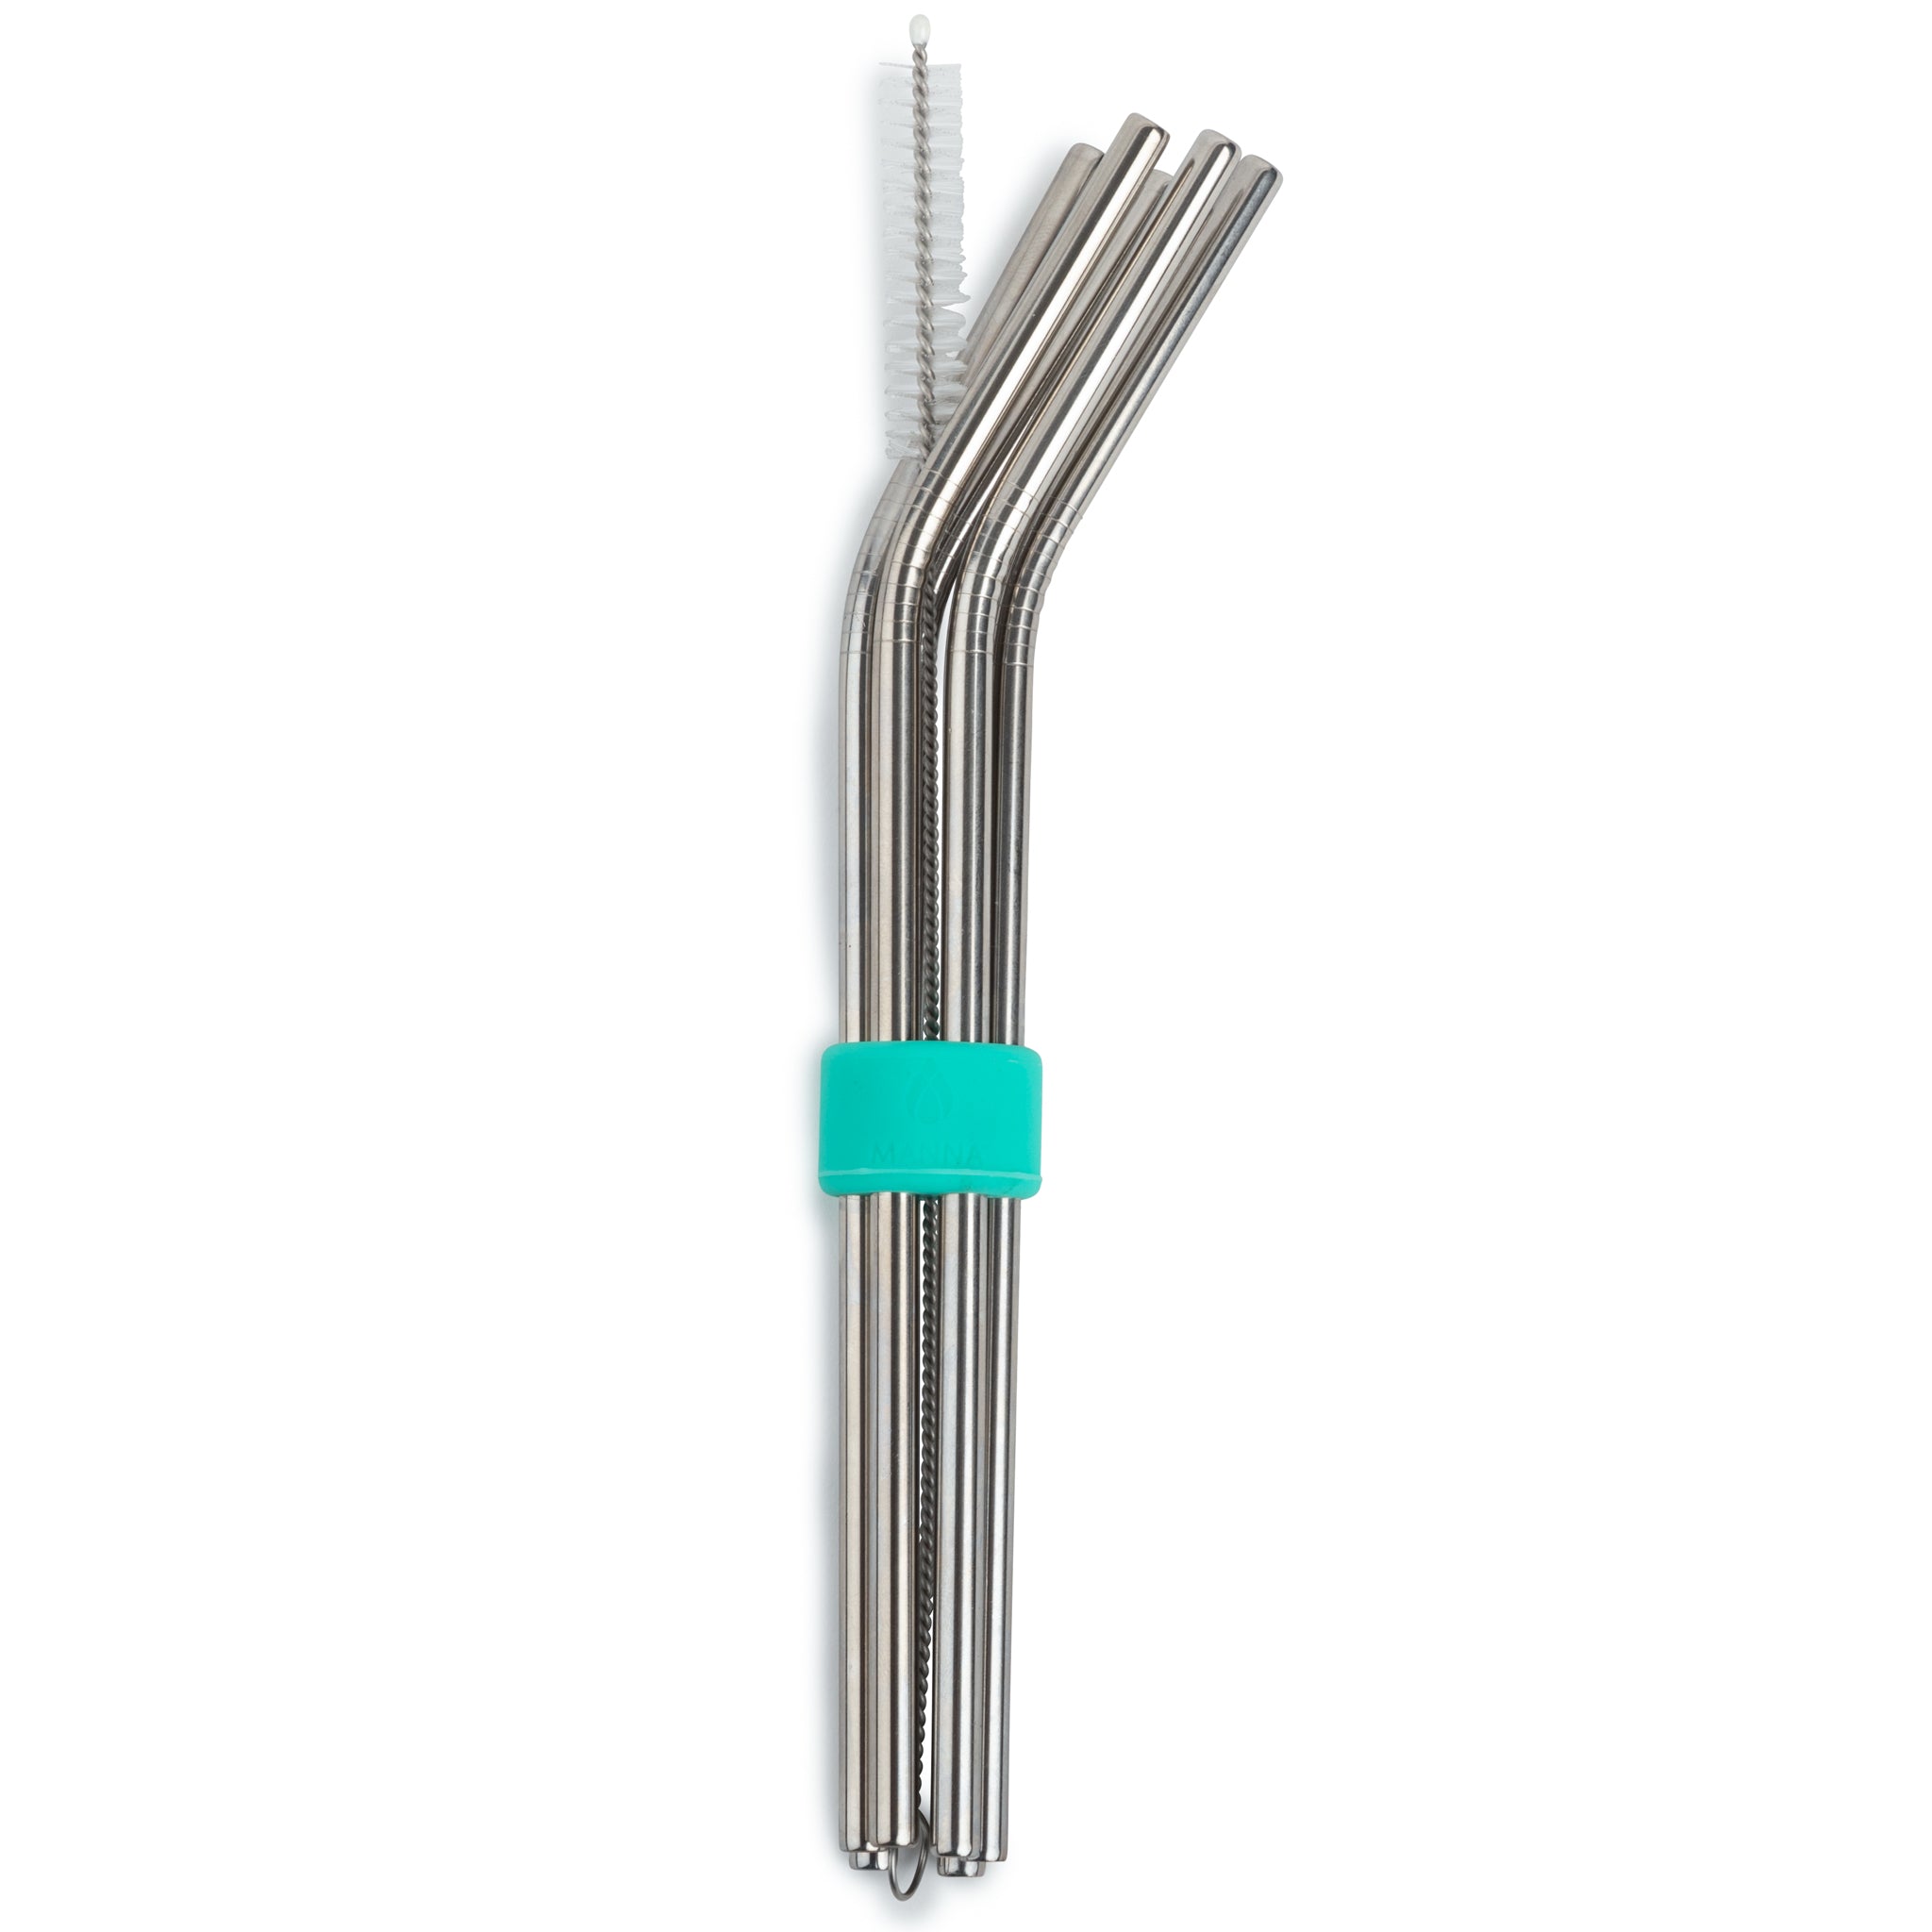 Set of 8 Stainless Steel Reusable Straws&Silicone Straw Holder – Manna  Hydration